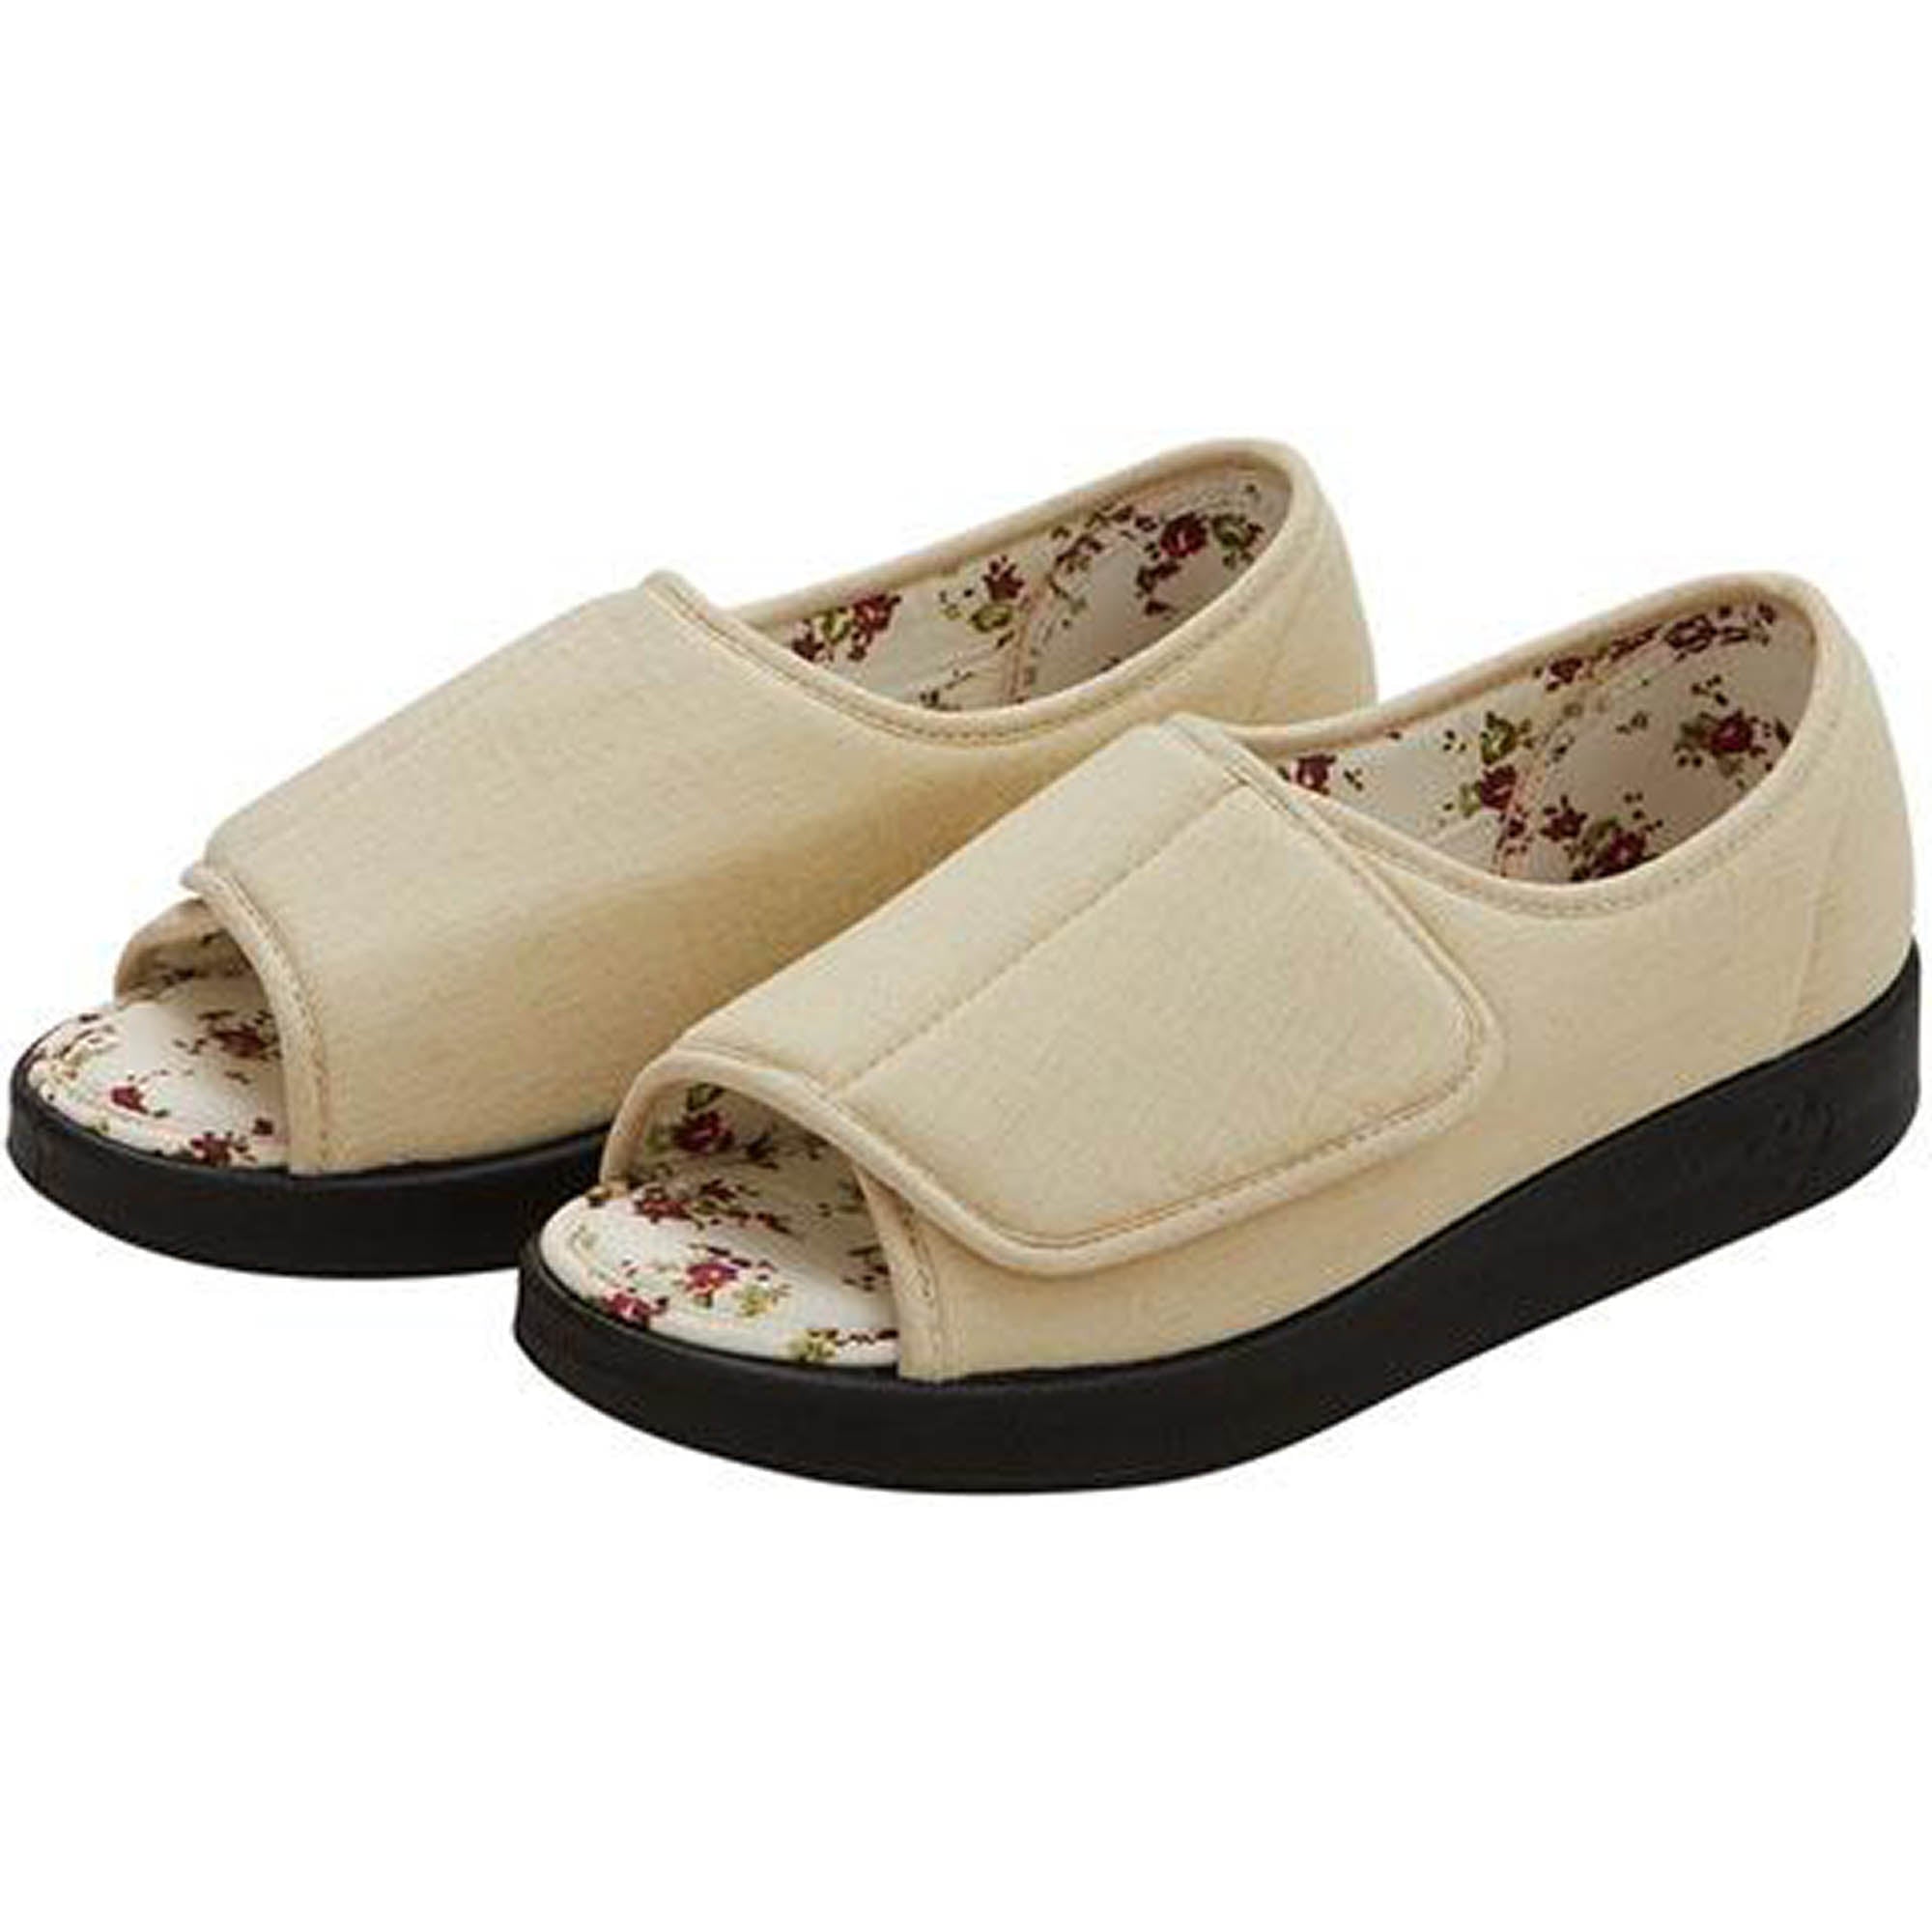 Silverts Women's Extra Wide Open-Toed Shoes - Misty Rose - 7